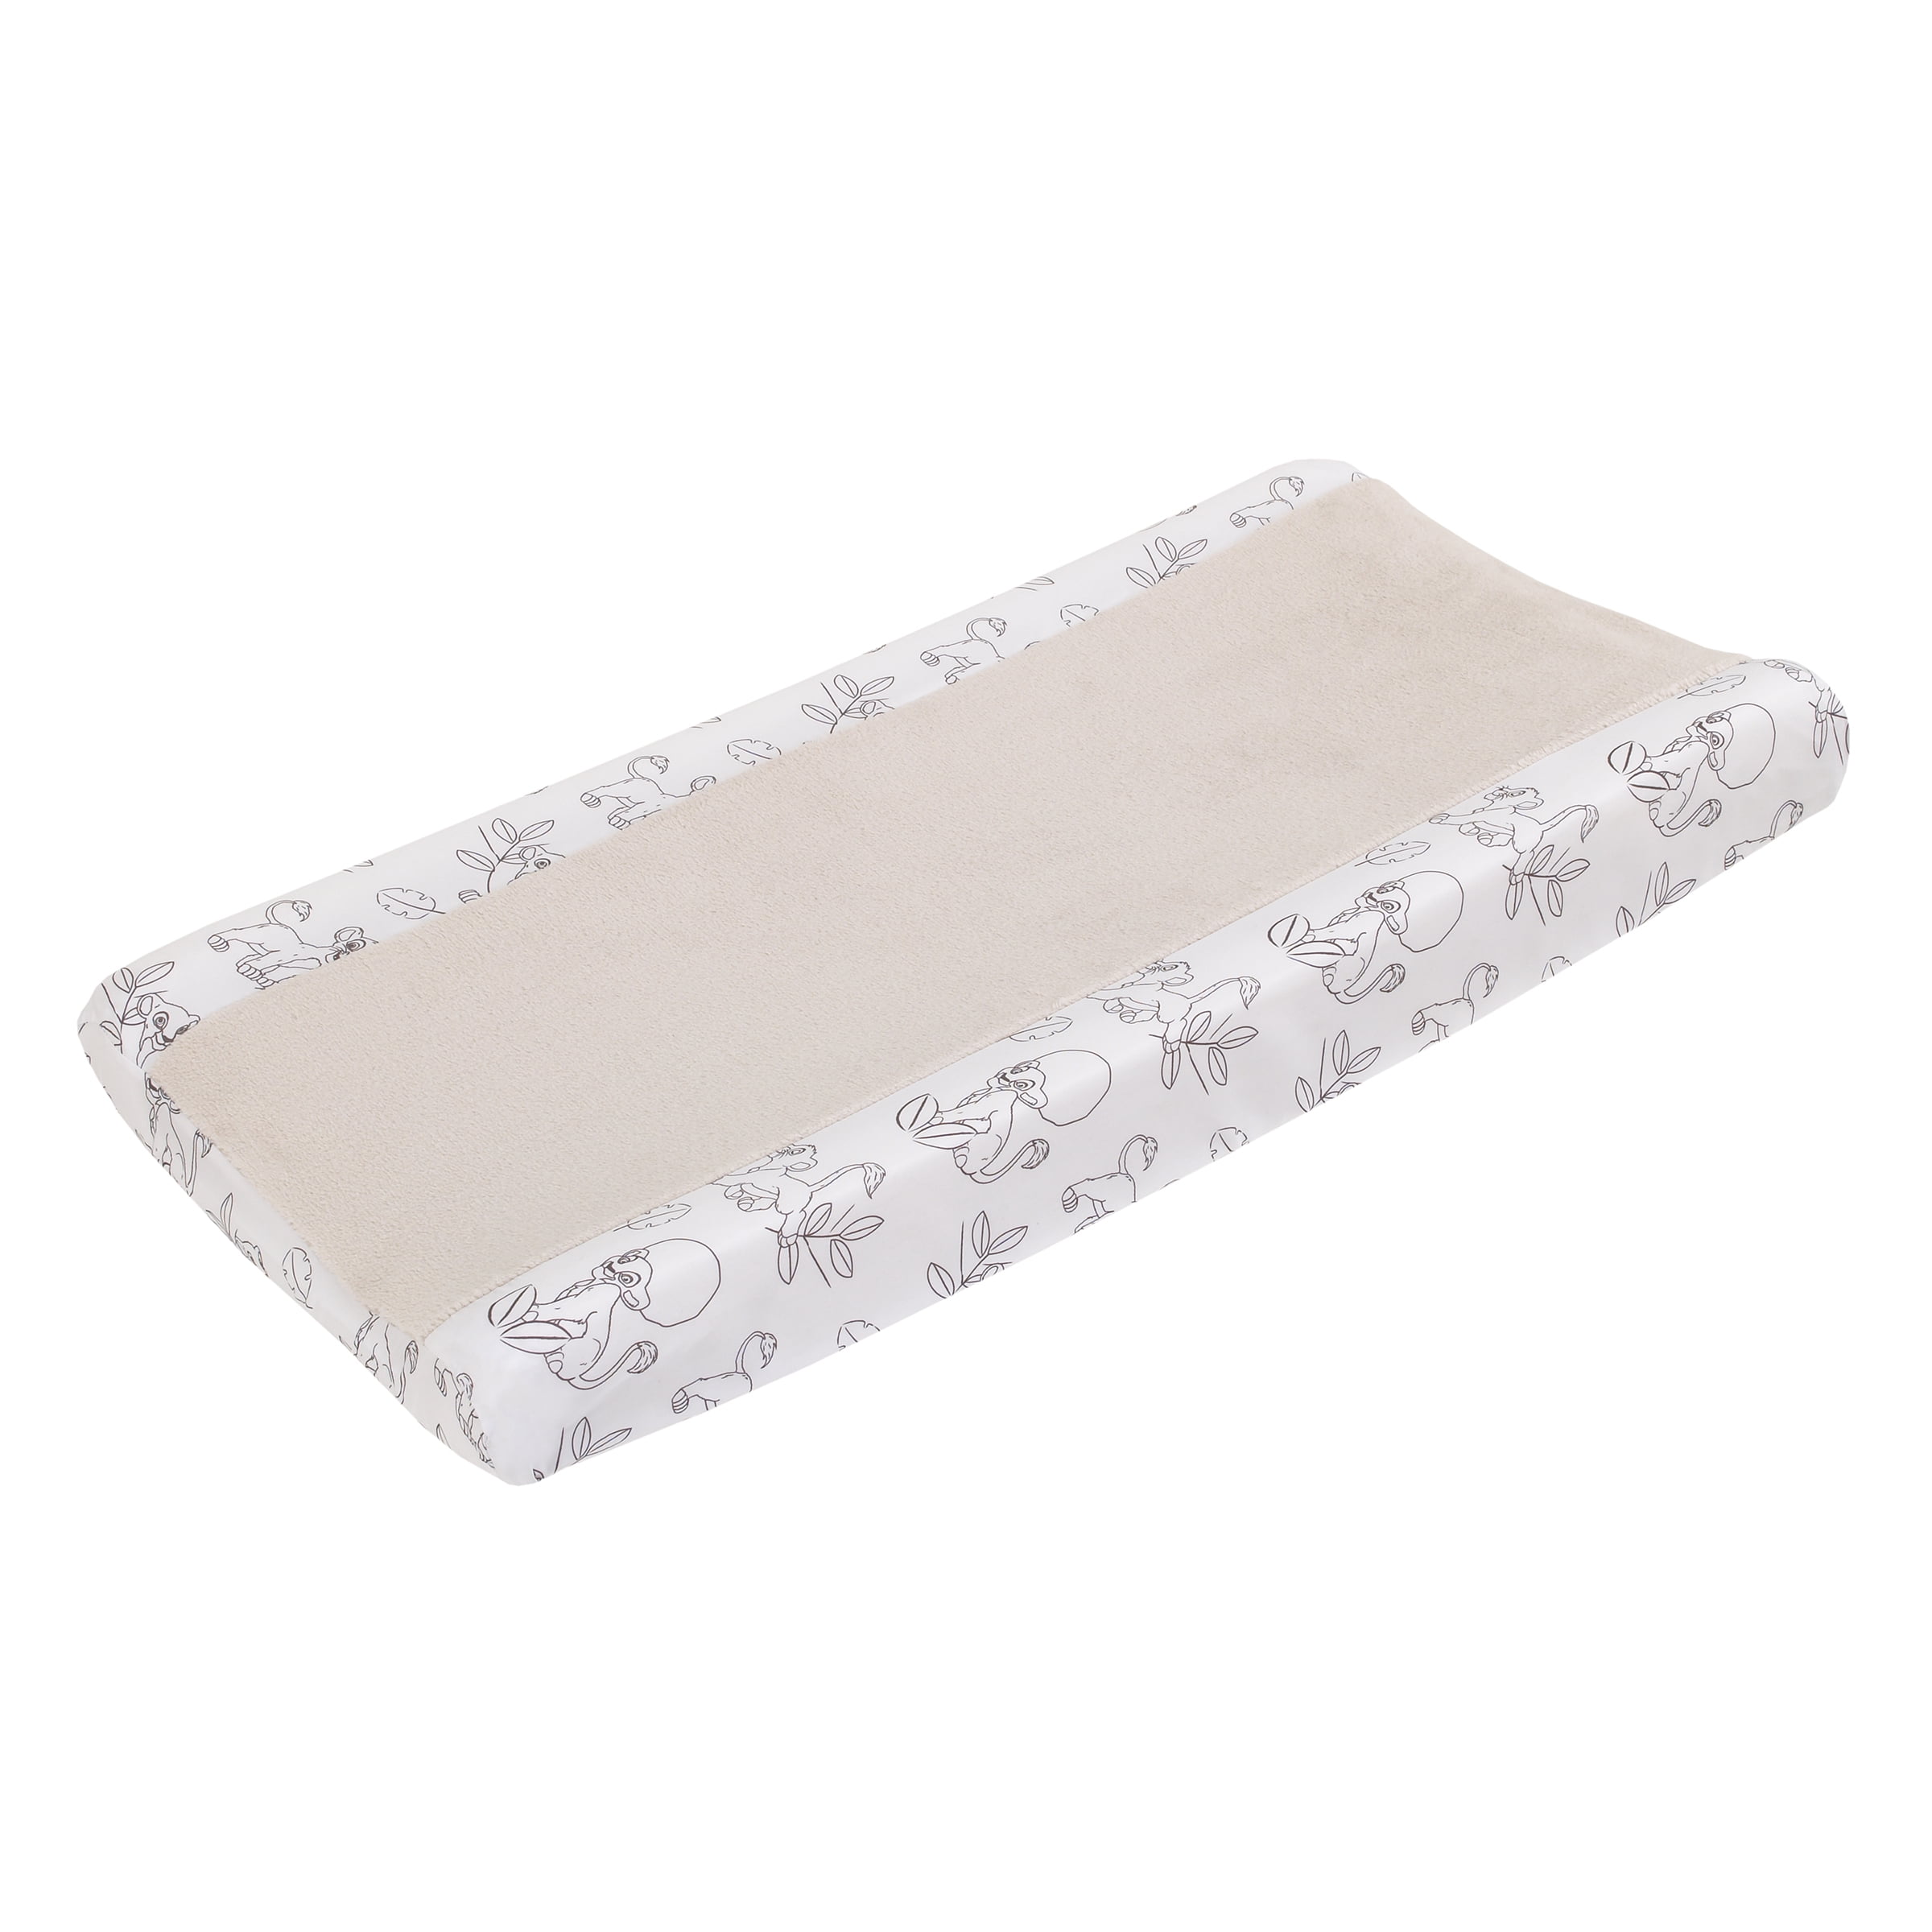 Disney Diaper Changing Pad Cover, White Lion King Animal Print, Fits Standard Sizes. $5.68  + Free S&H w/ Walmart+ or $35+